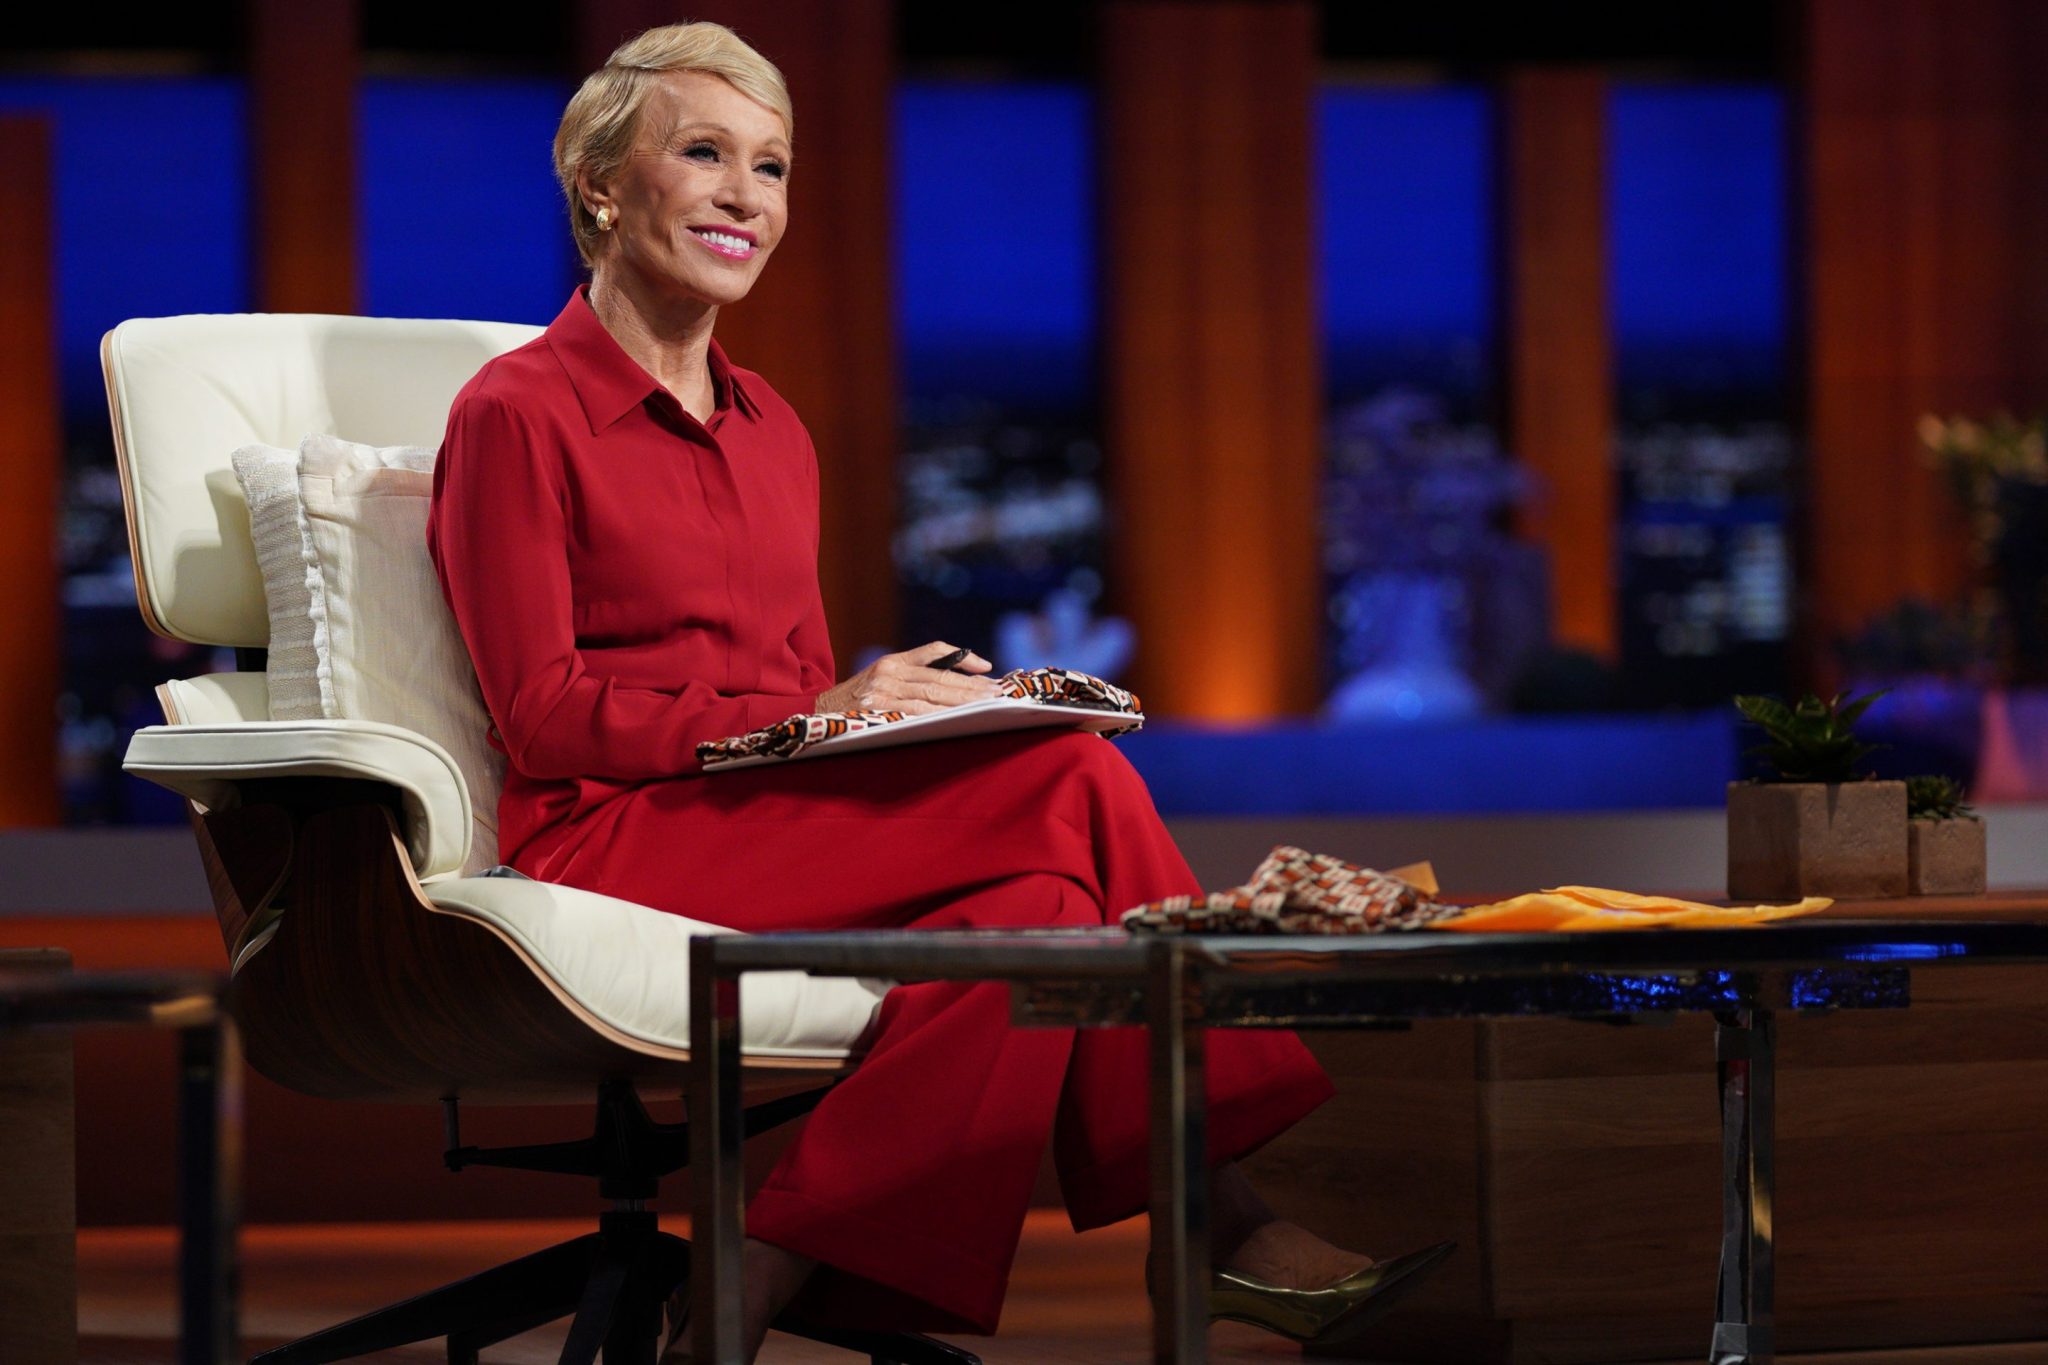 Barbara Corcoran of ABC’s Shark Tank on how her ‘most embarrassing moment’ led to an NYU contract